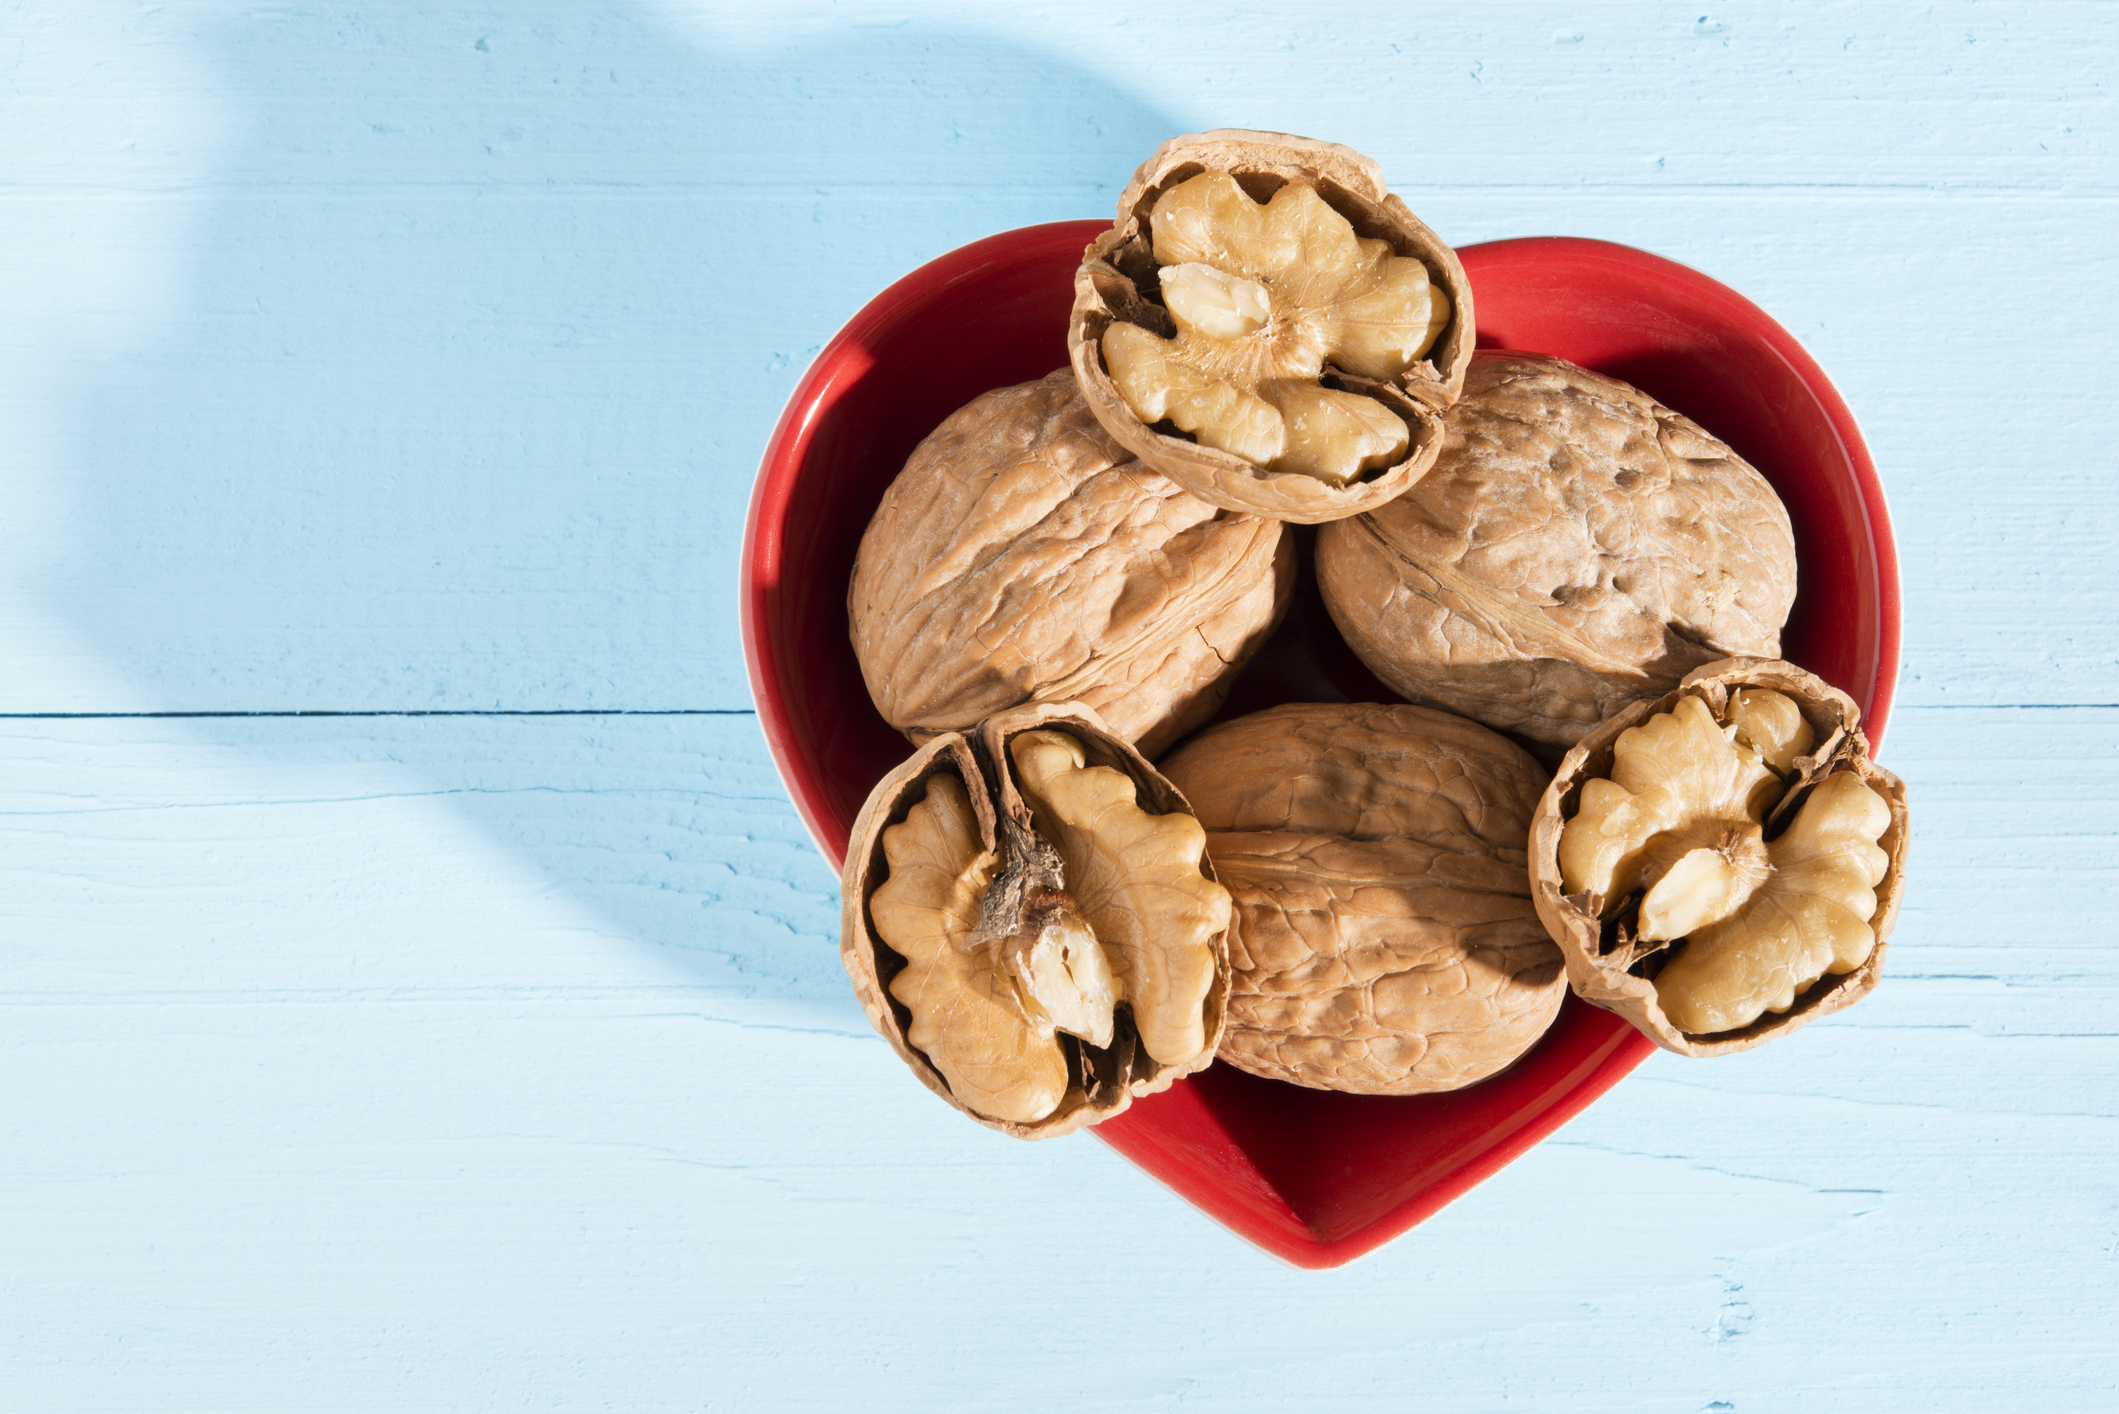 The amino acid deficiency tied to heart problems and the nut that fixes it